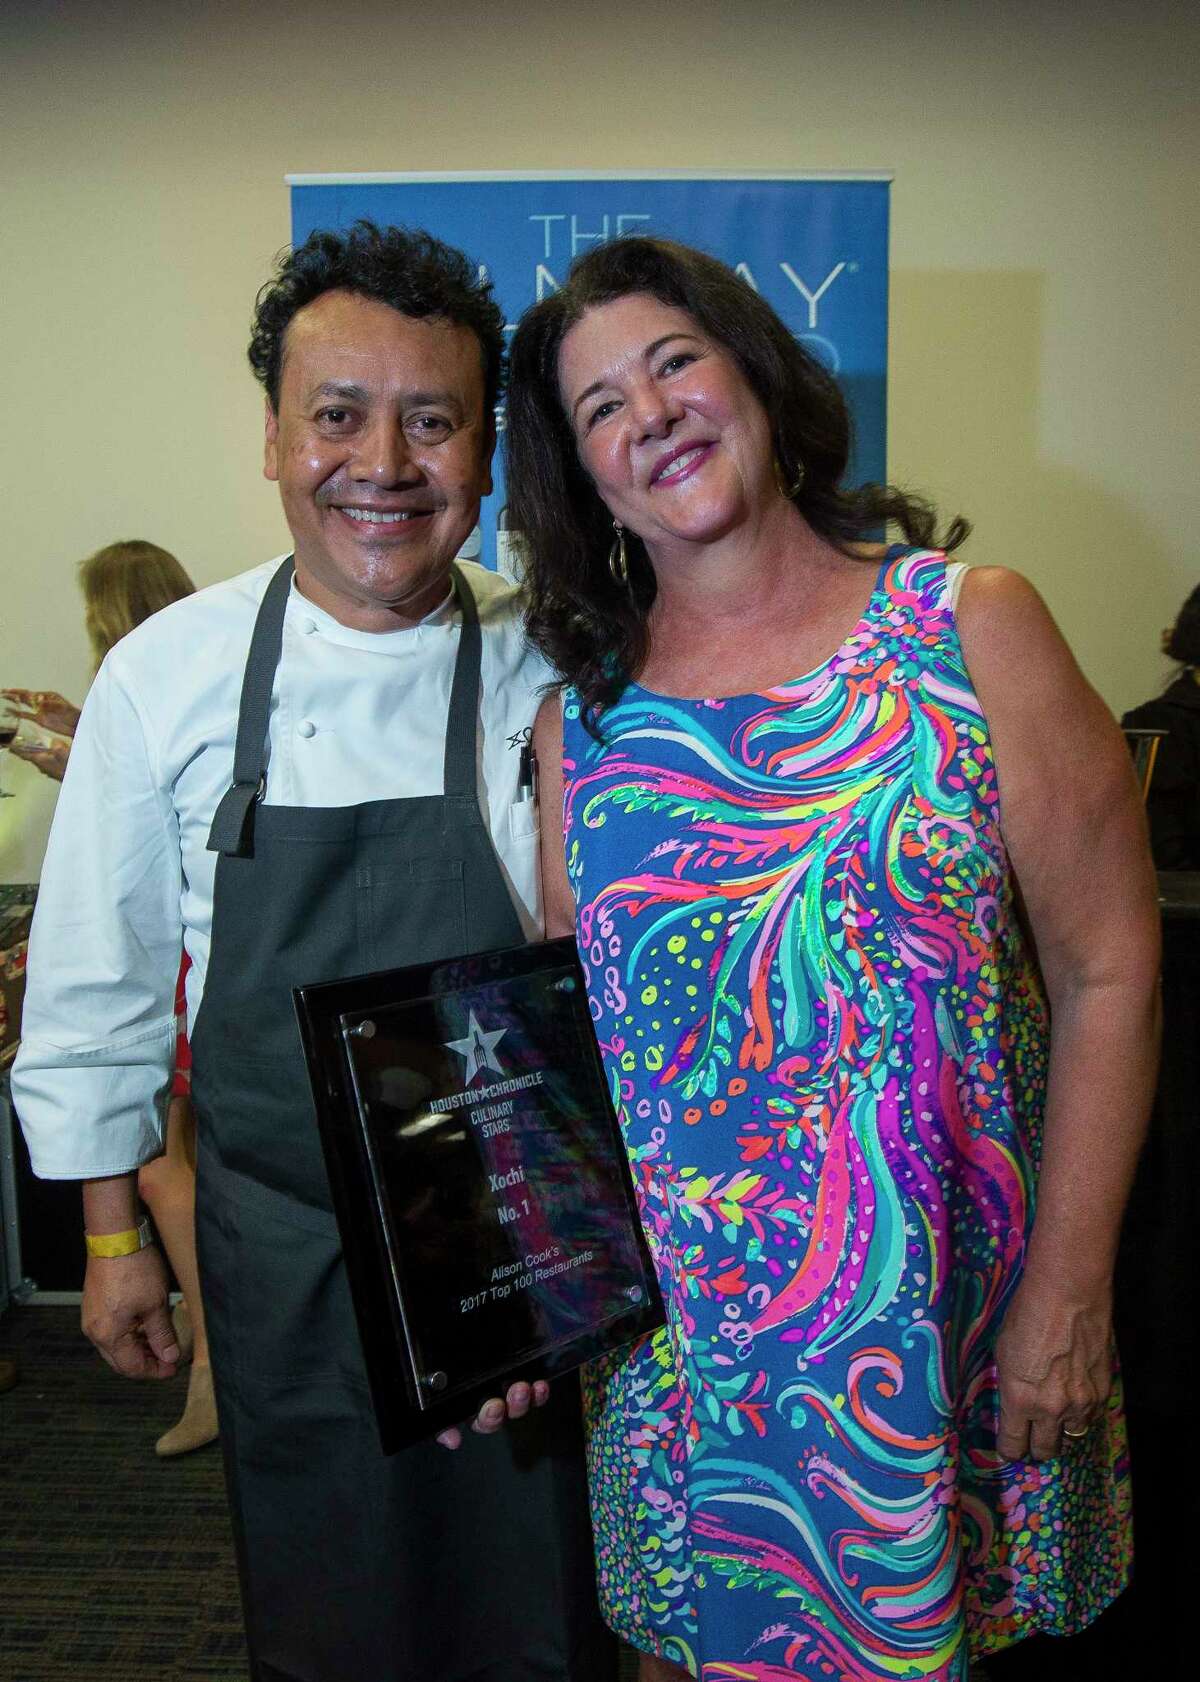 Hugo Ortega and his wife Tracy Vaught at the Top 100 Culinary Stars event at the Houston Chronicle. Their restaurant, Xochi, was named the No.1 restaurant in Houston.